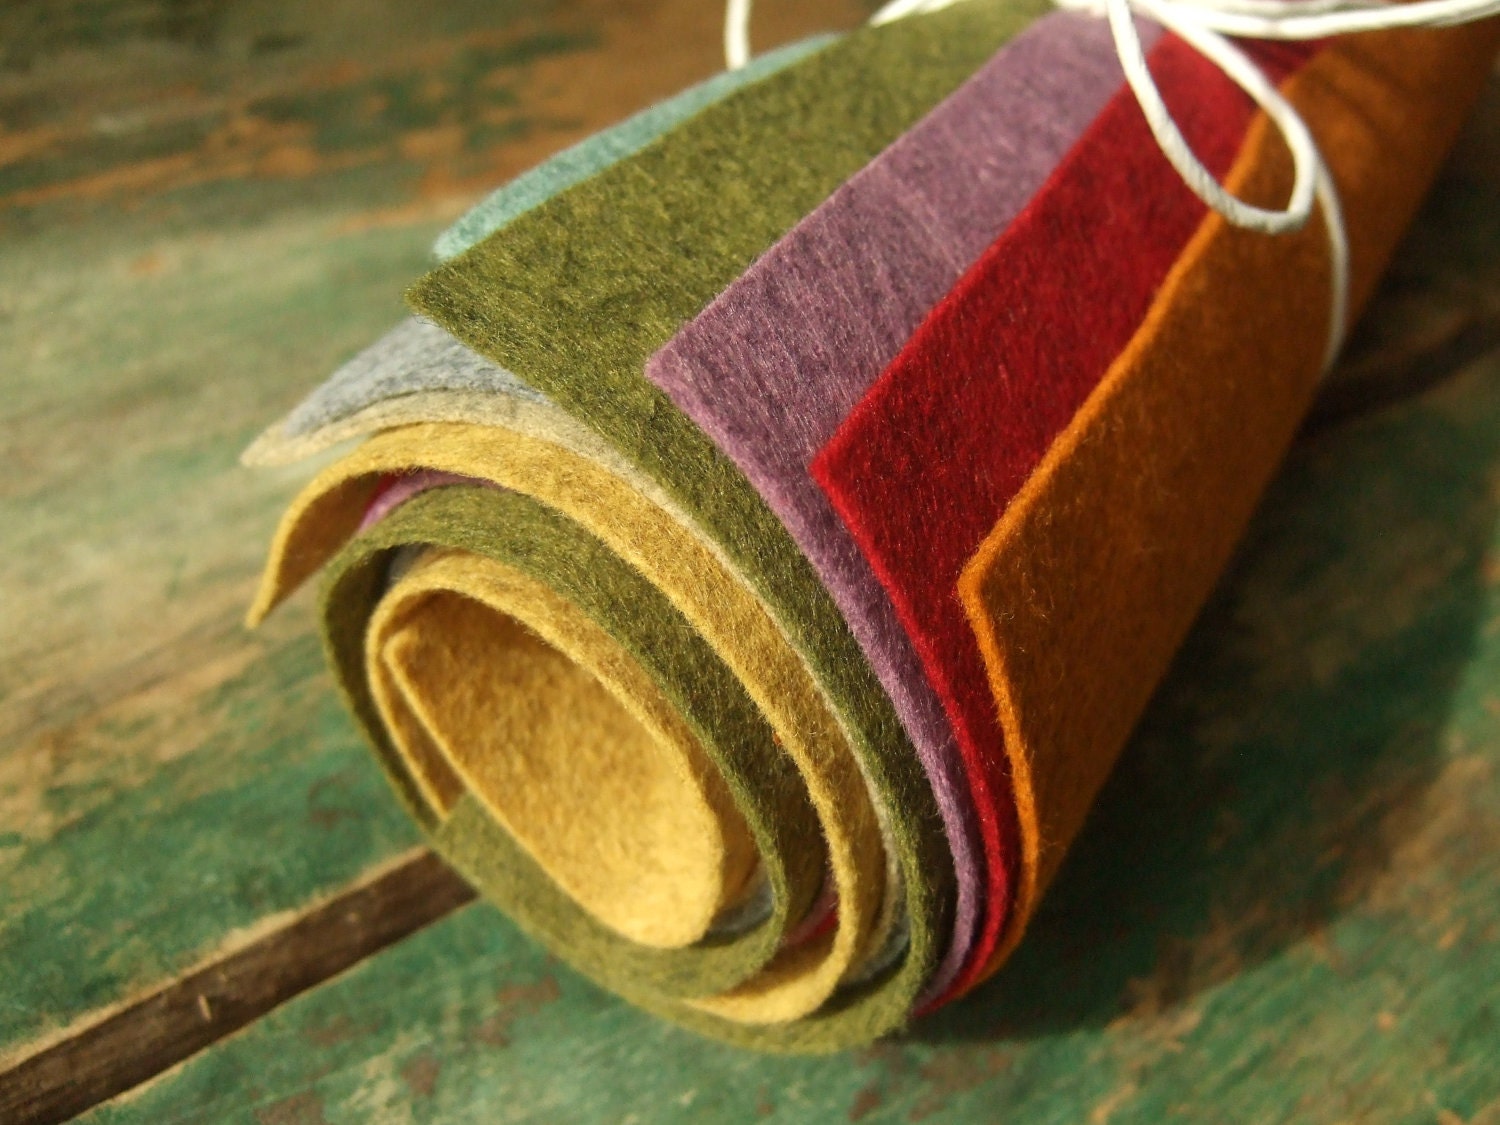 9x12 Wool Felt Sheets - A Collection of Heathers - 8 Sheets of Felt